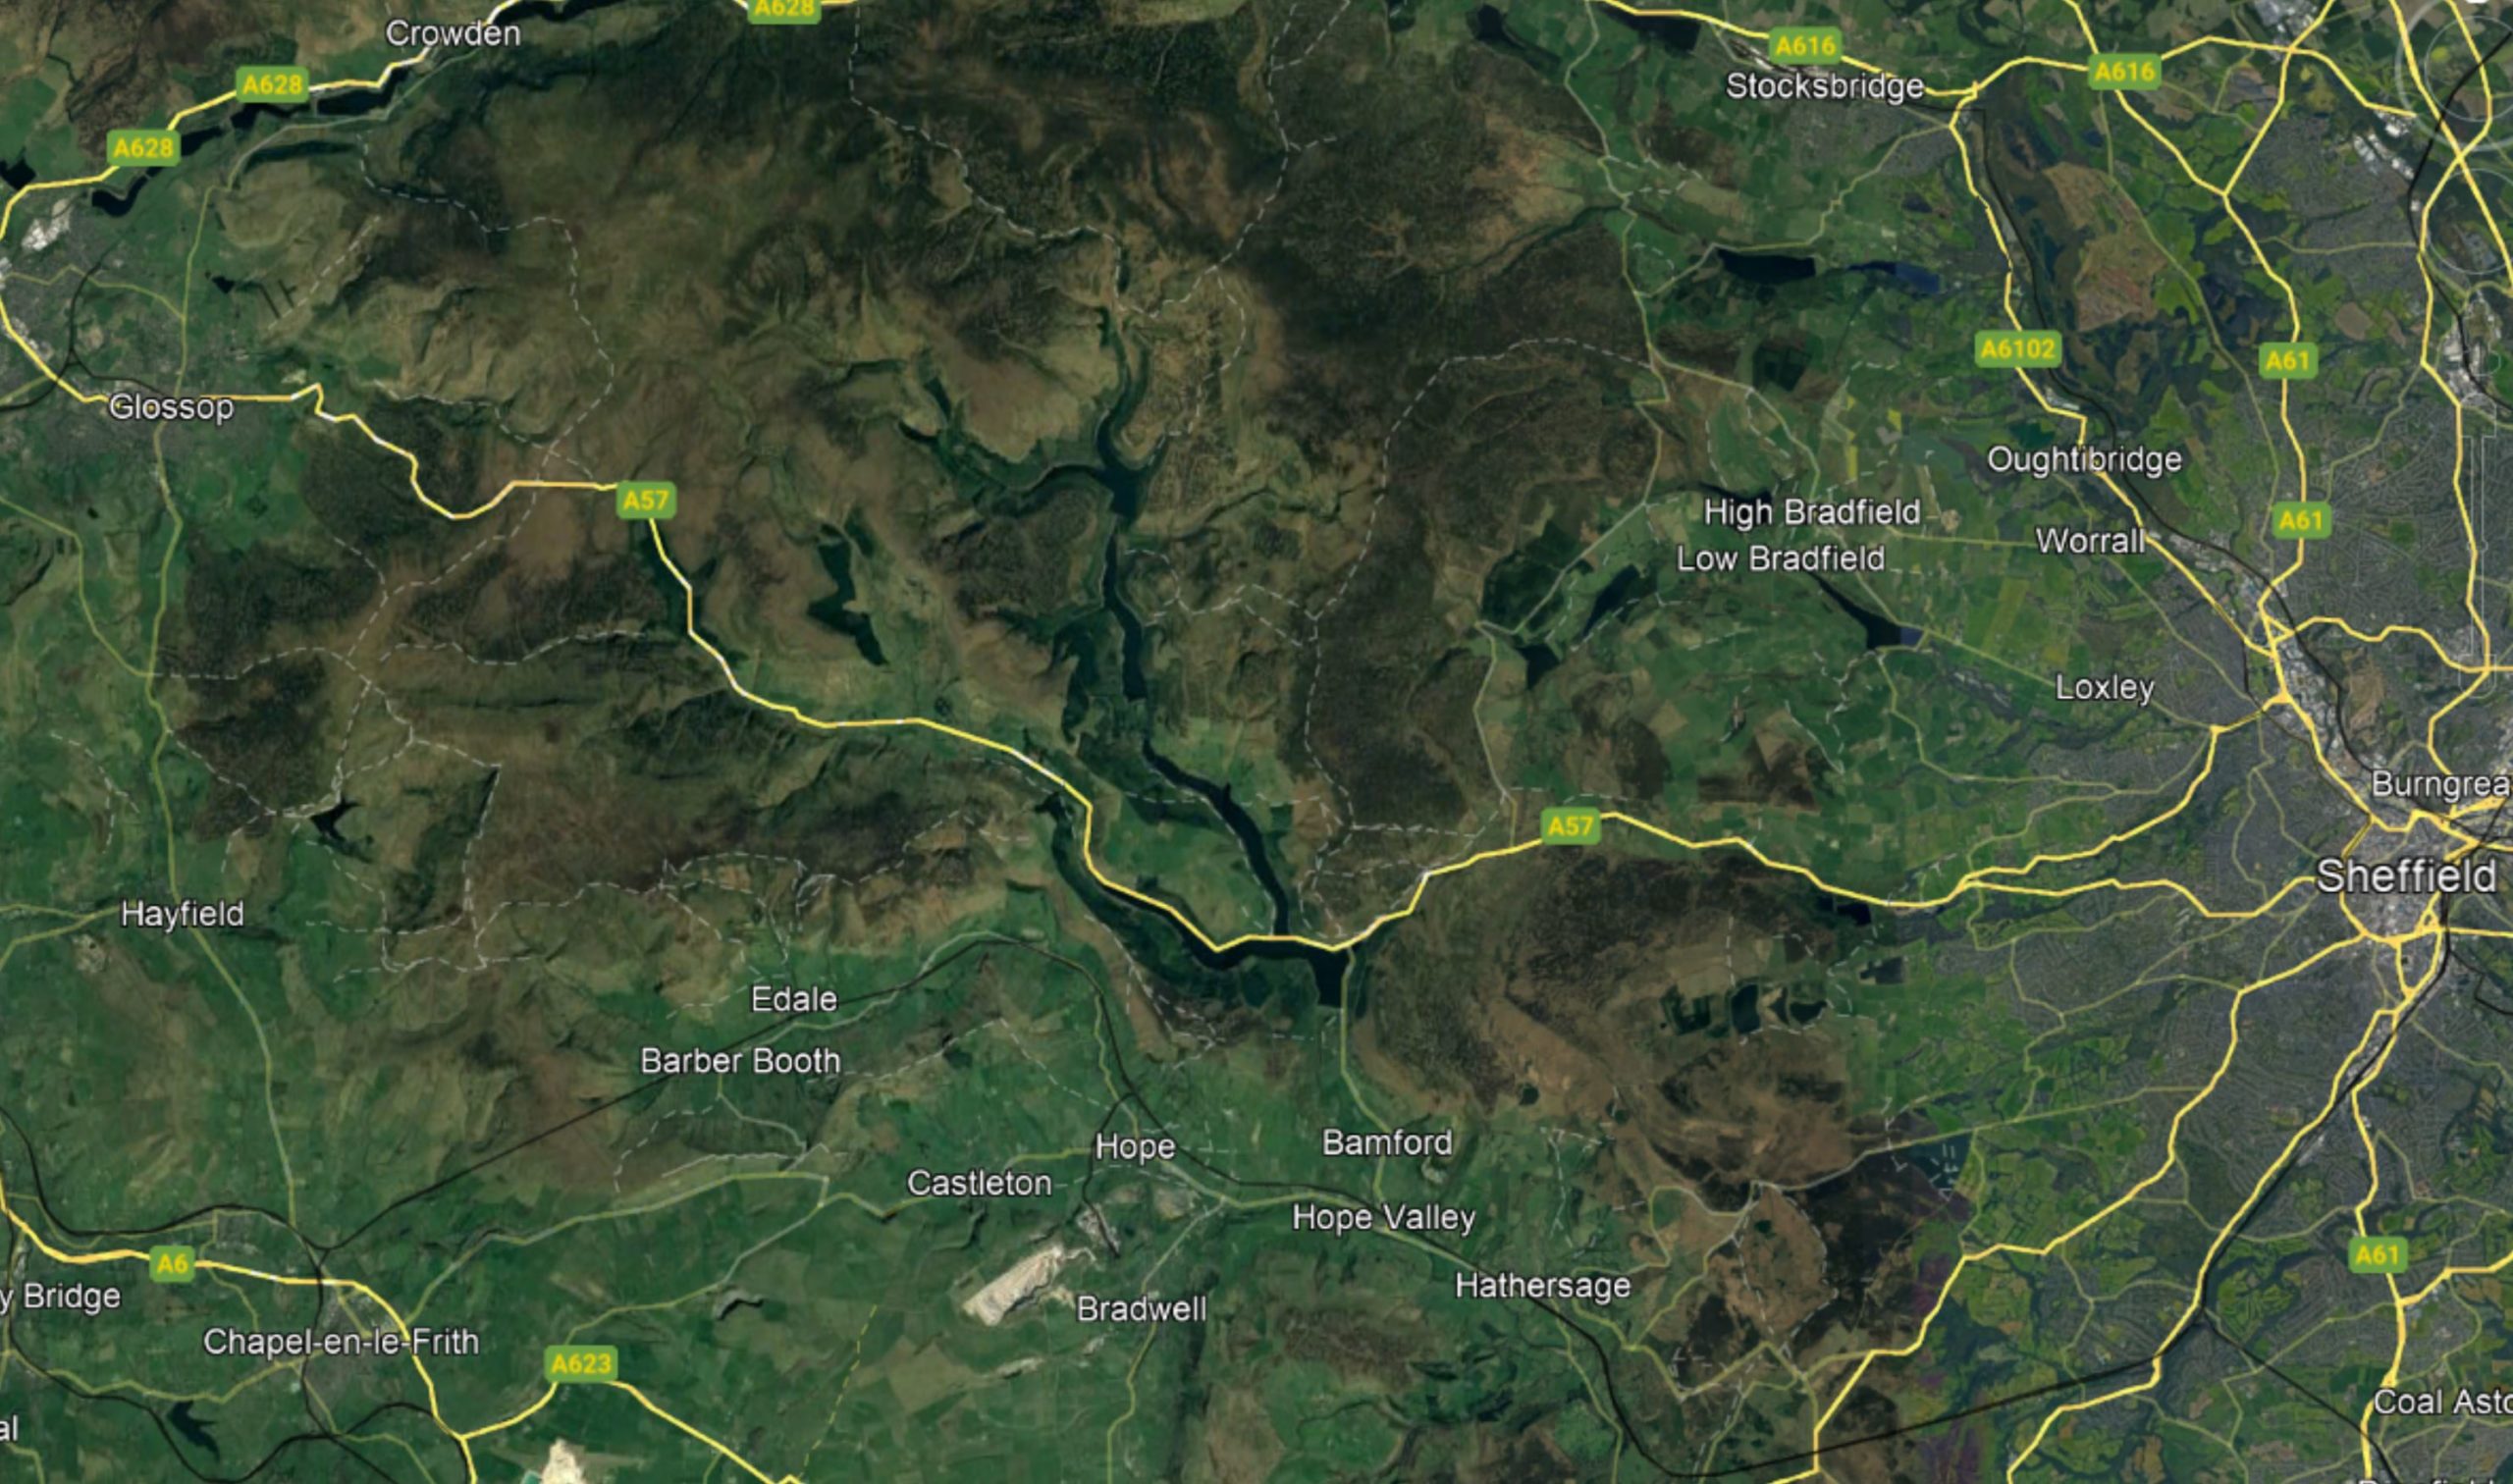 Google Earth map of the A57 Snake Pass in northern England.